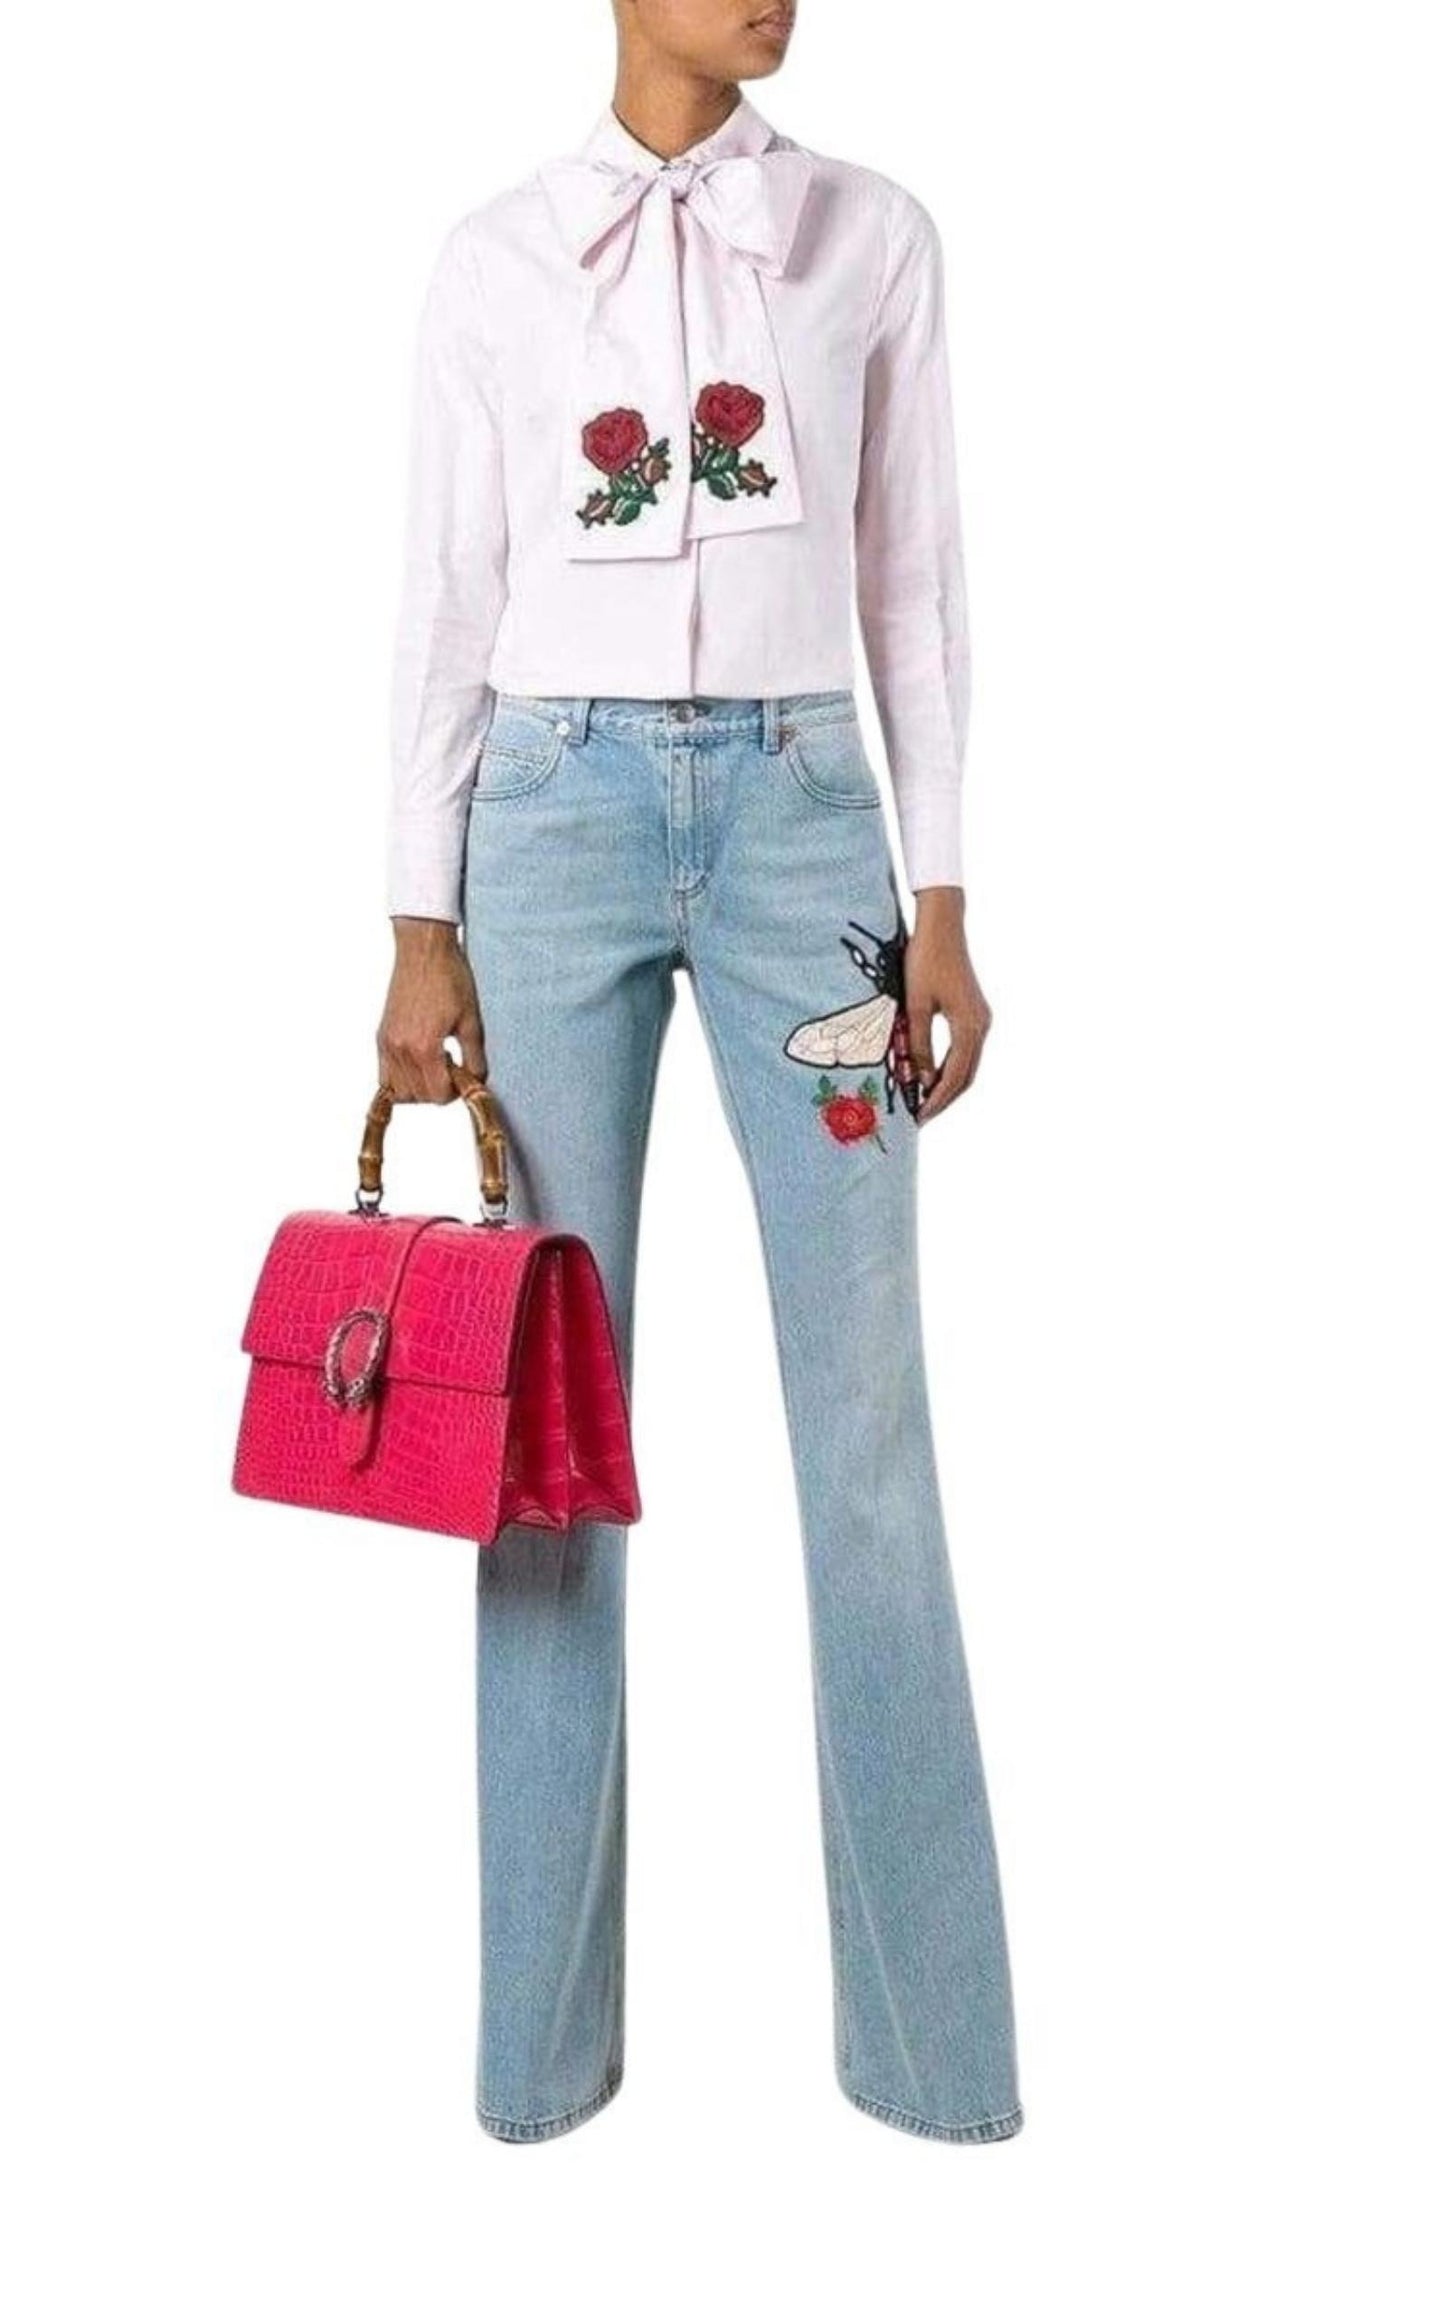  GucciFly Embroidered Flared Cotton Jeans - Runway Catalog